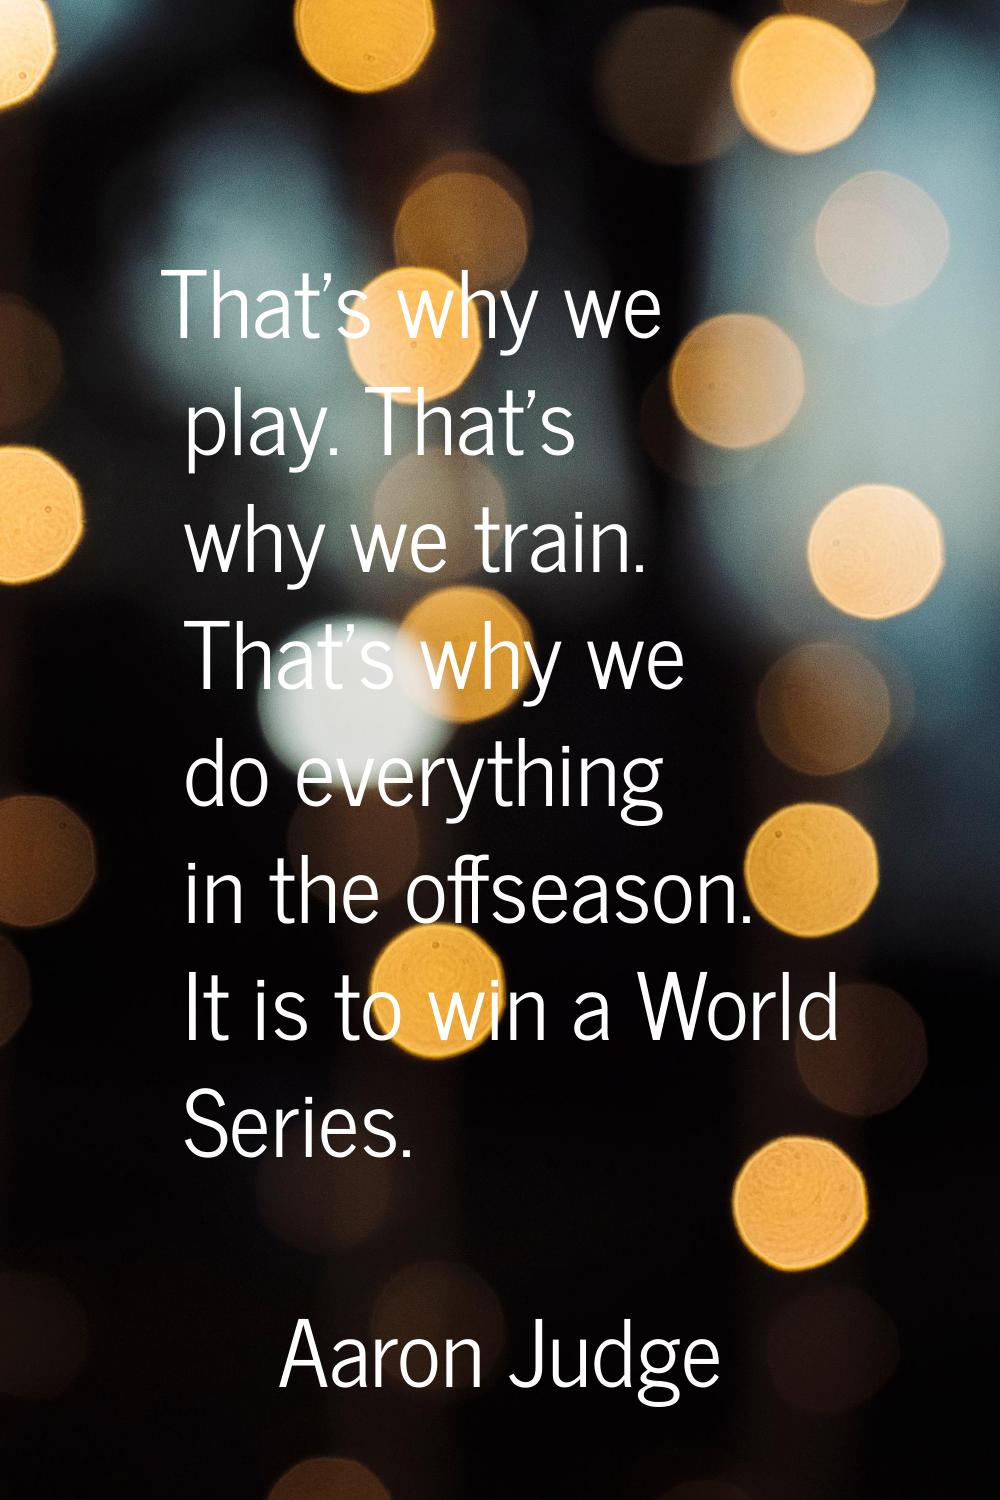 That's why we play. That's why we train. That's why we do everything in the offseason. It is to win